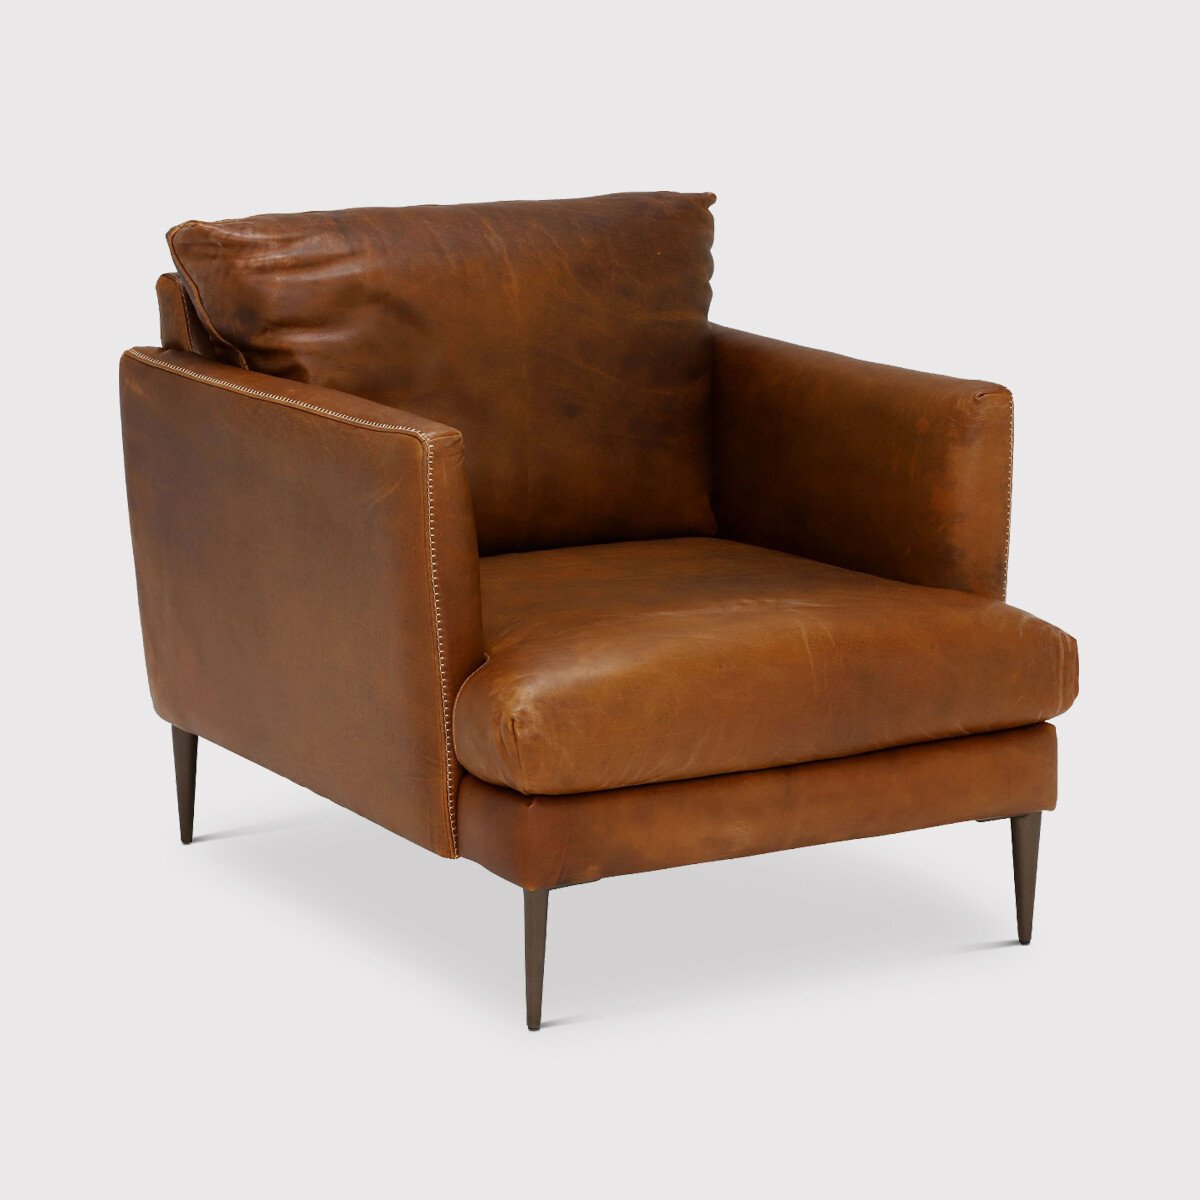 Acacia Armchair, Brown Leather | Barker & Stonehouse